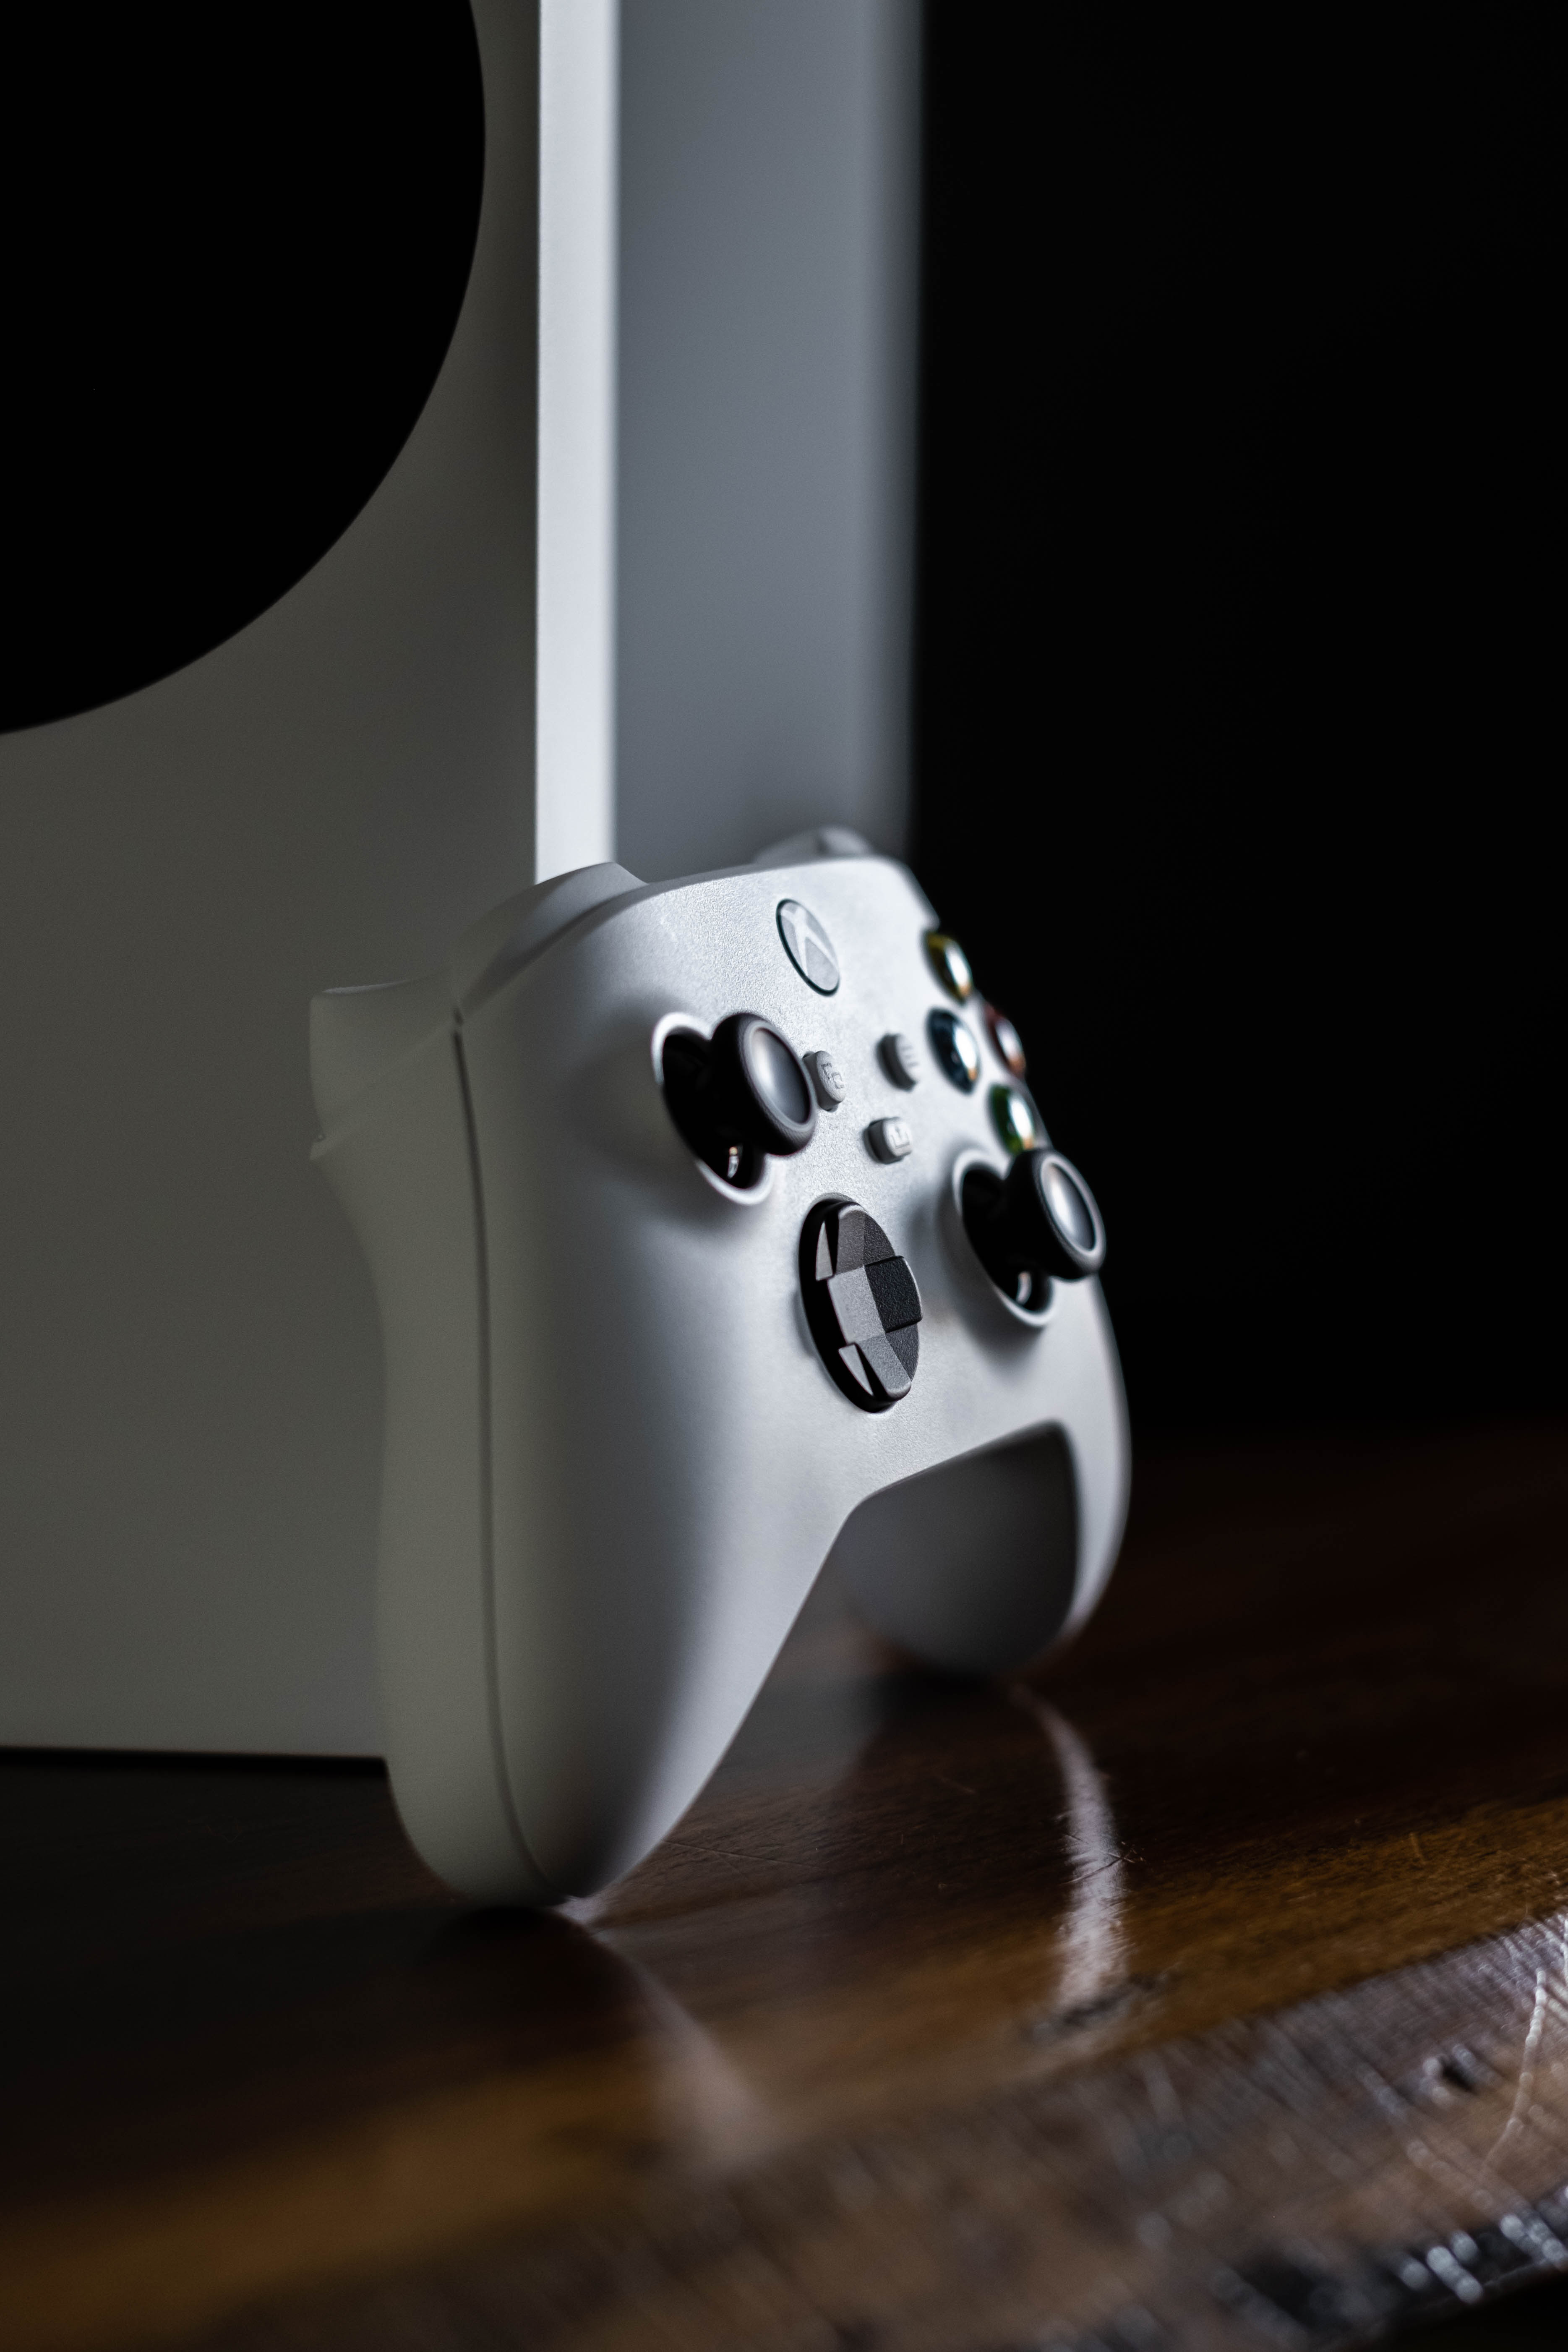 How Microsoft is ditching the video game console wars